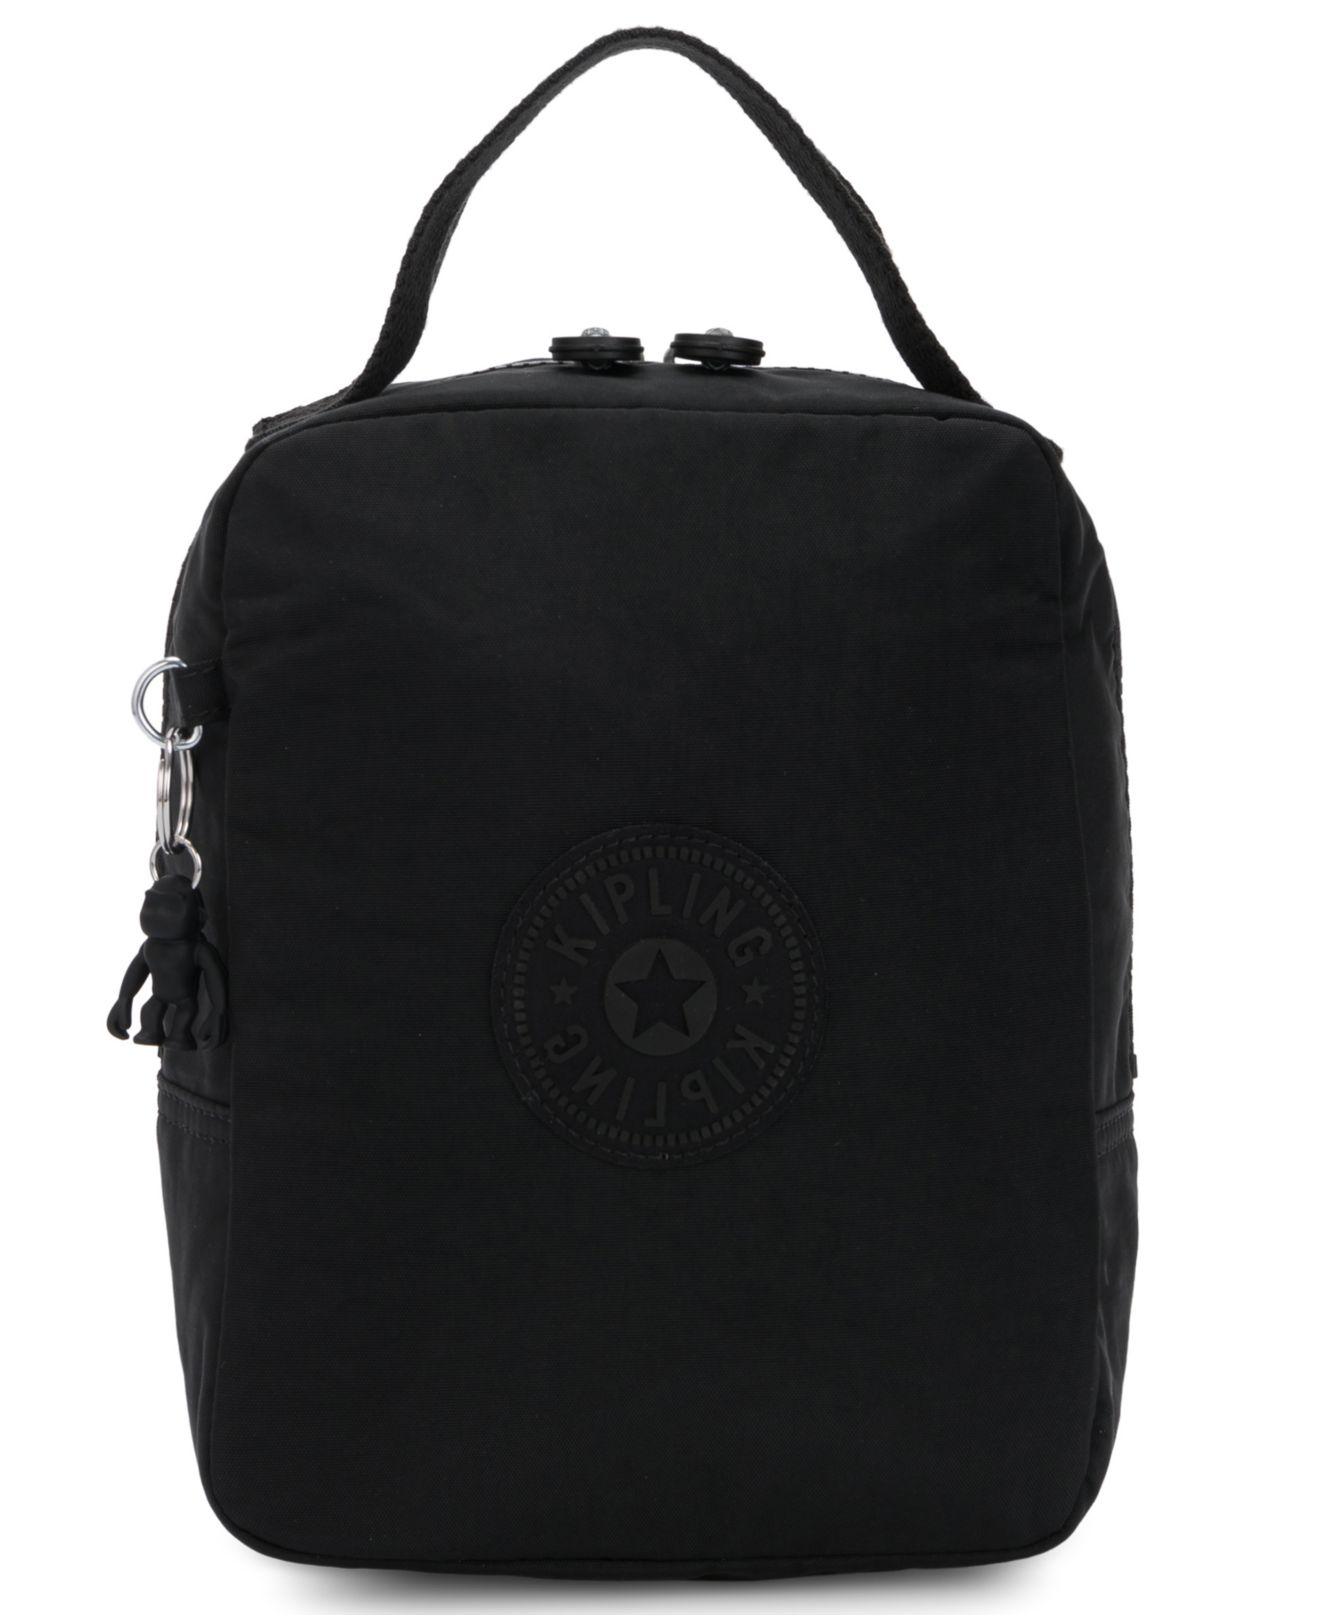 Kipling Lyla Insulated Lunch Bag Top Handle in Black | Lyst